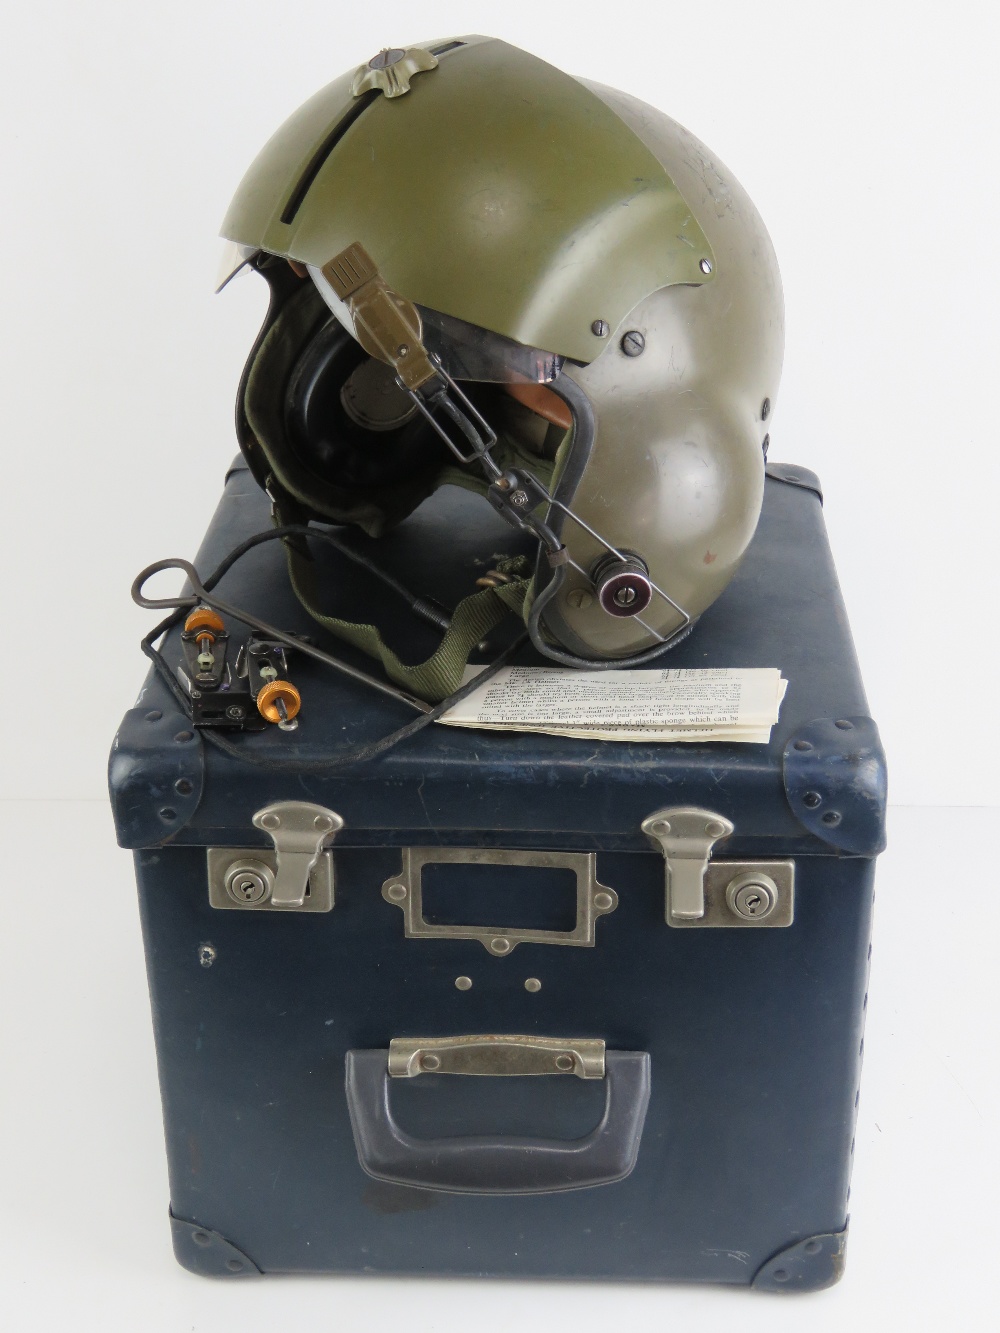 A 1971 Gentex US Pilots helmet in box with instructions. - Image 2 of 8